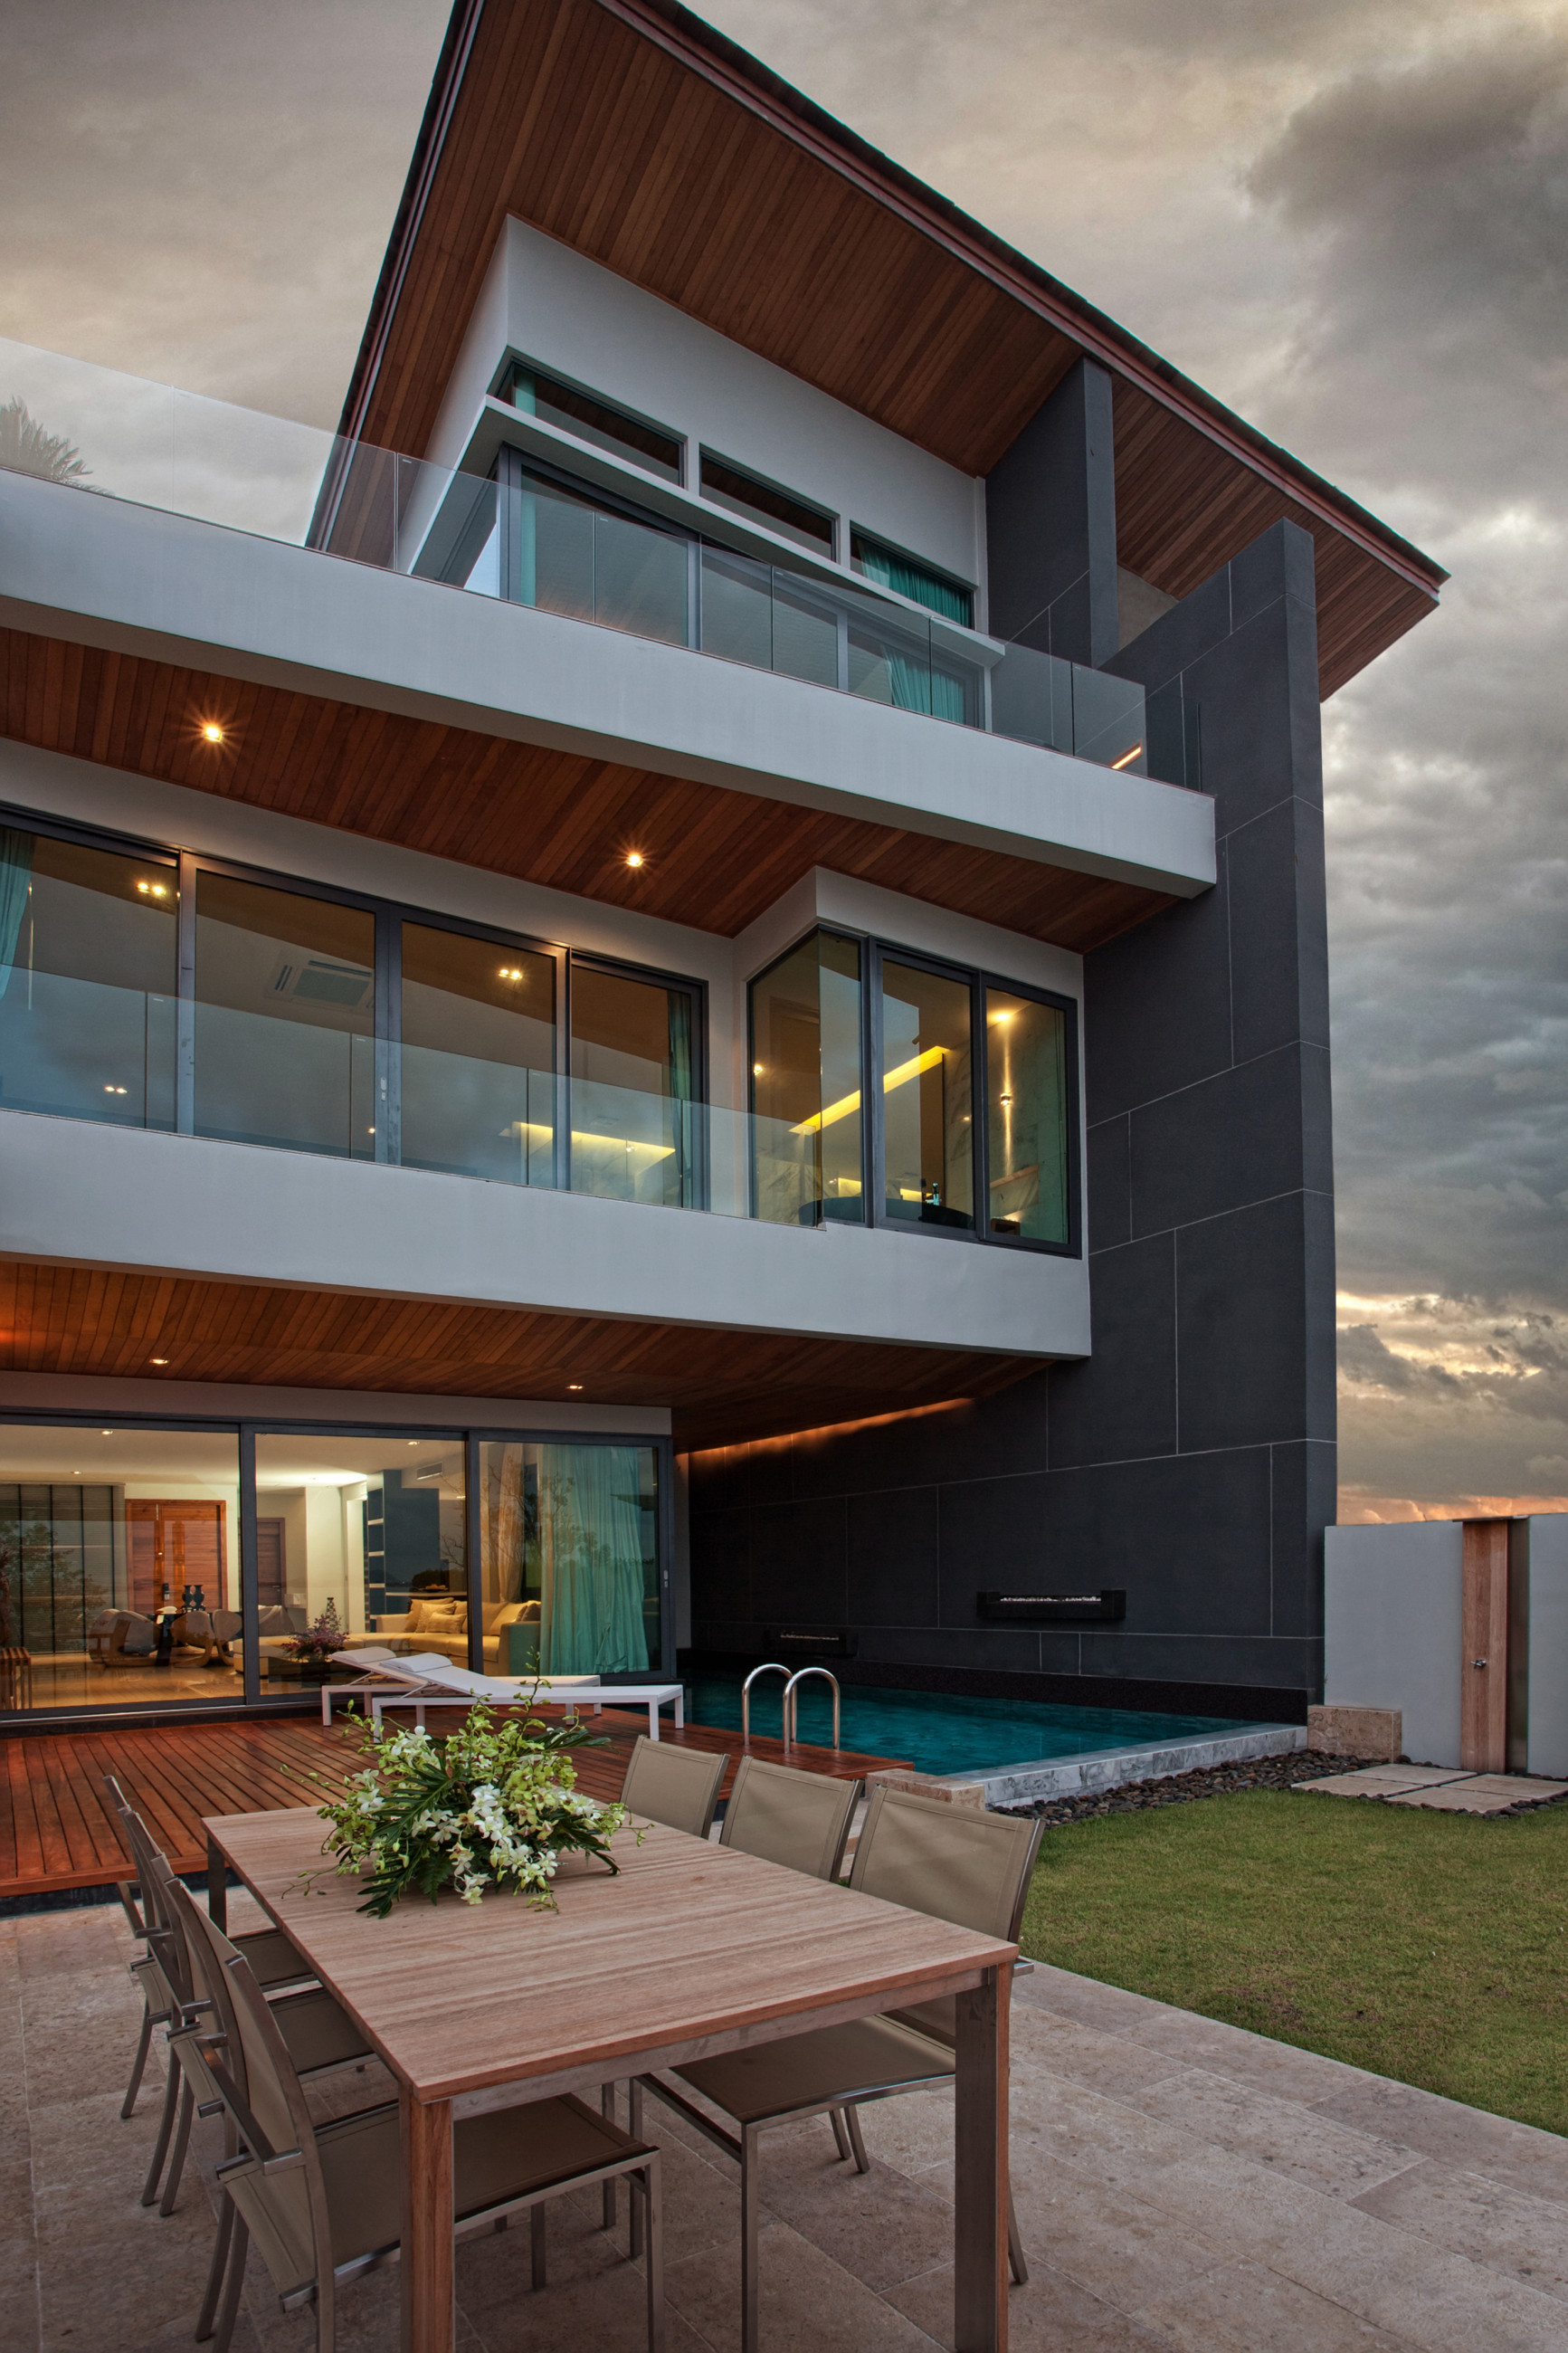 Modern house featuring a glass balustrade, swimming pool, and outdoor seating area